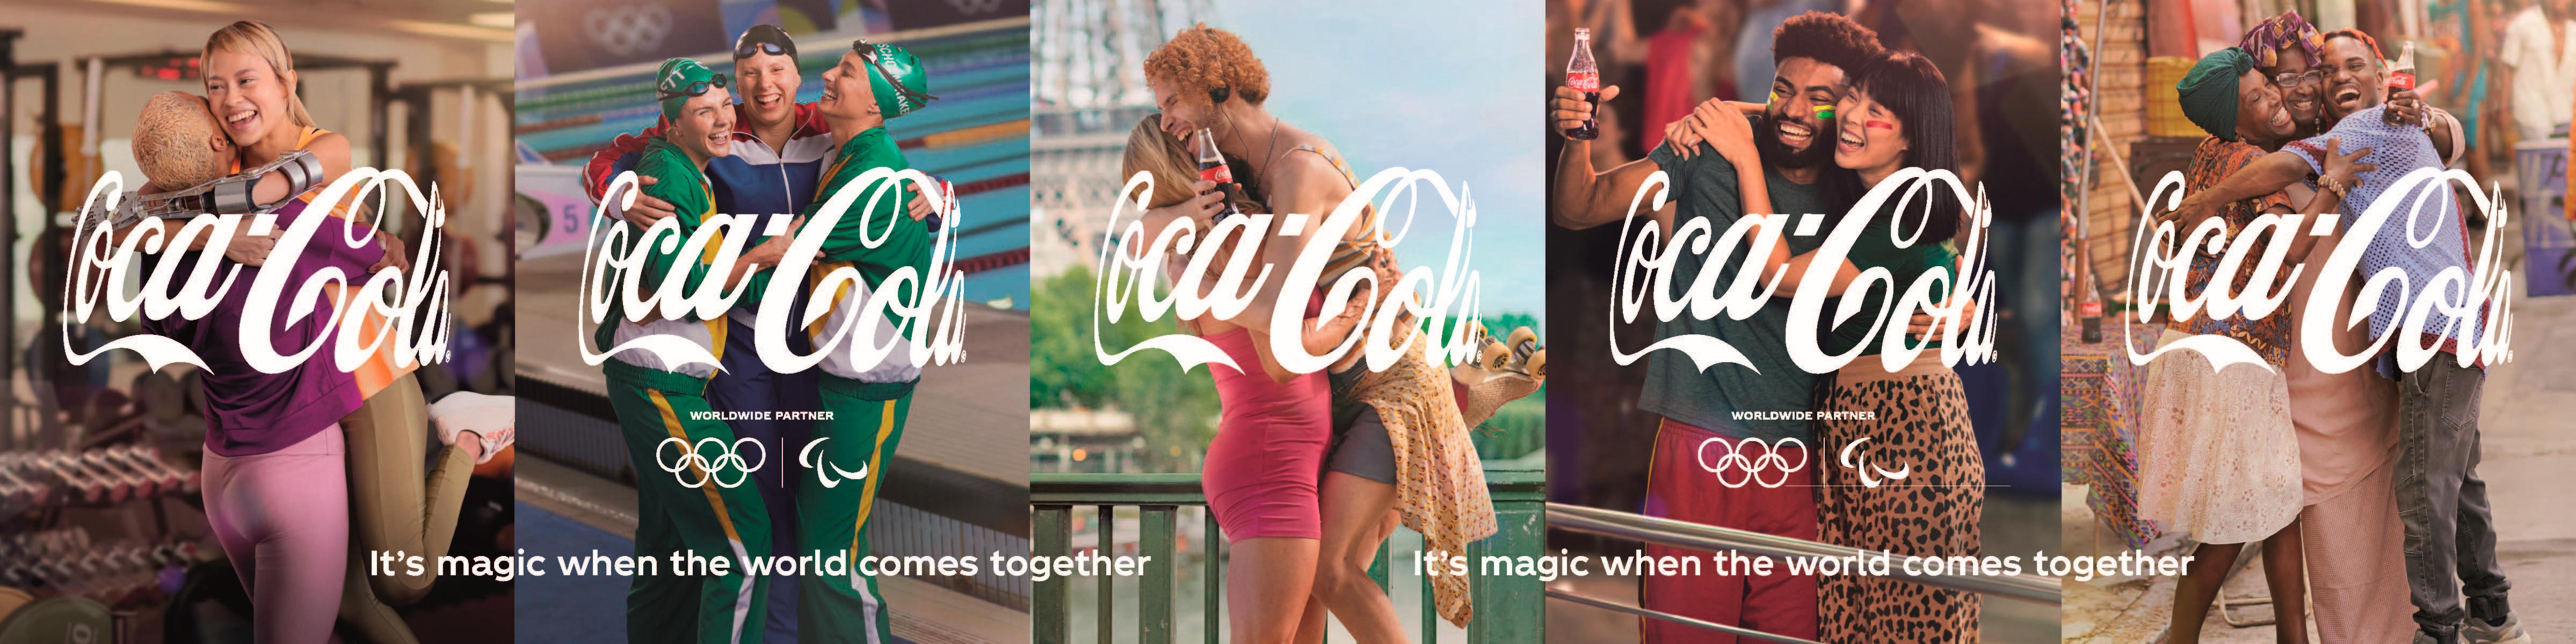 ‘It’s Magic When the World Comes Together’: Olympic Athletes and Fans Alike Embrace in Global Coca-Cola Campaign for Paris 2024 